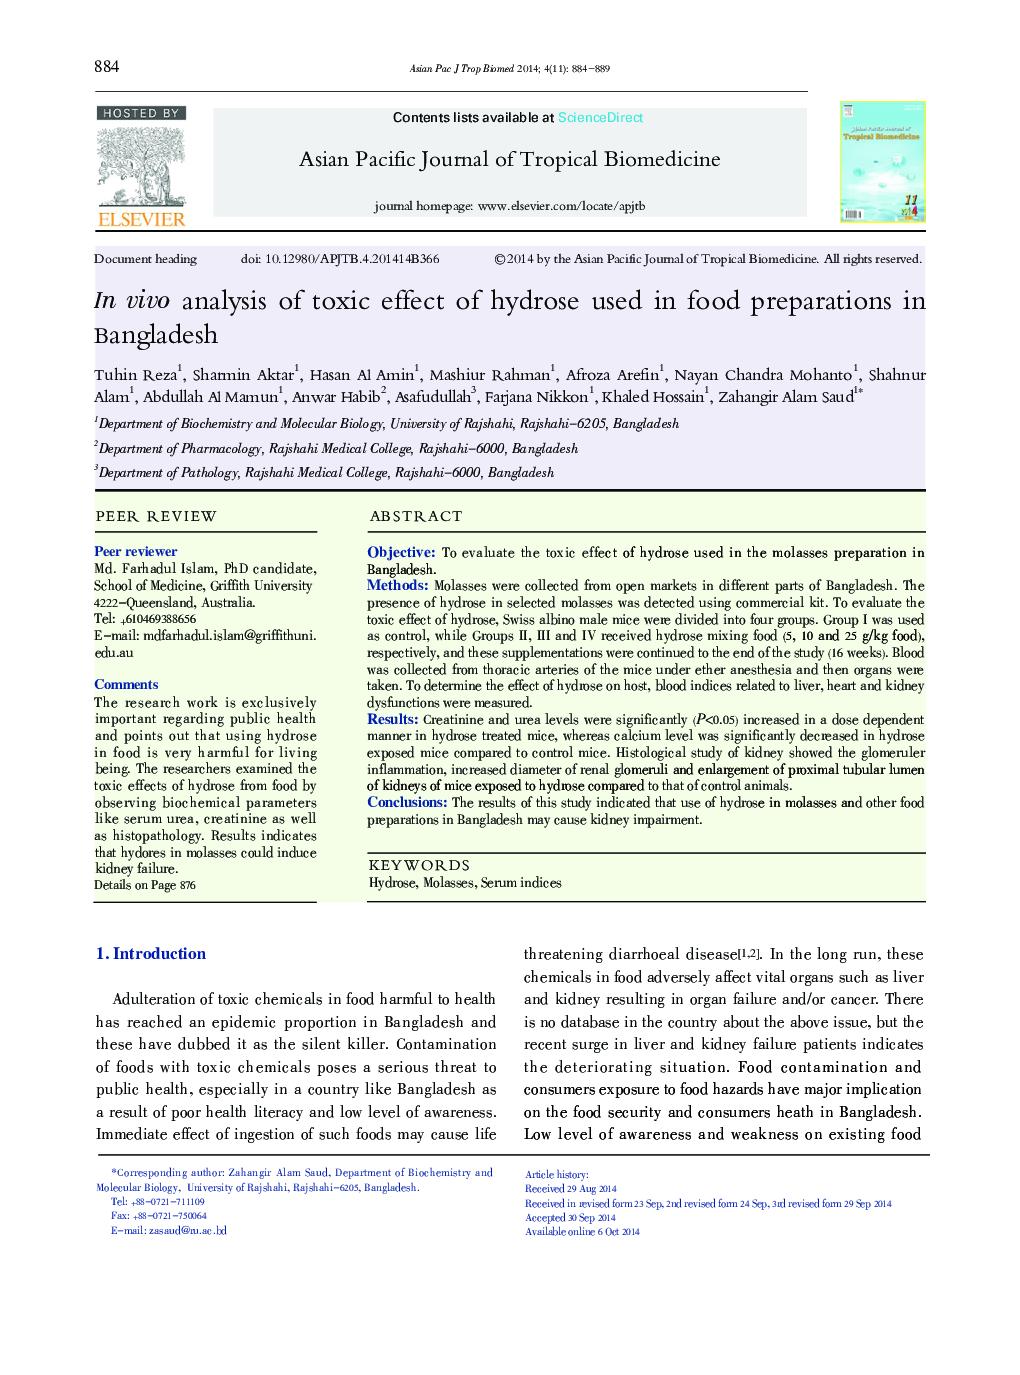 In vivo analysis of toxic effect of hydrose used in food preparations in Bangladesh 